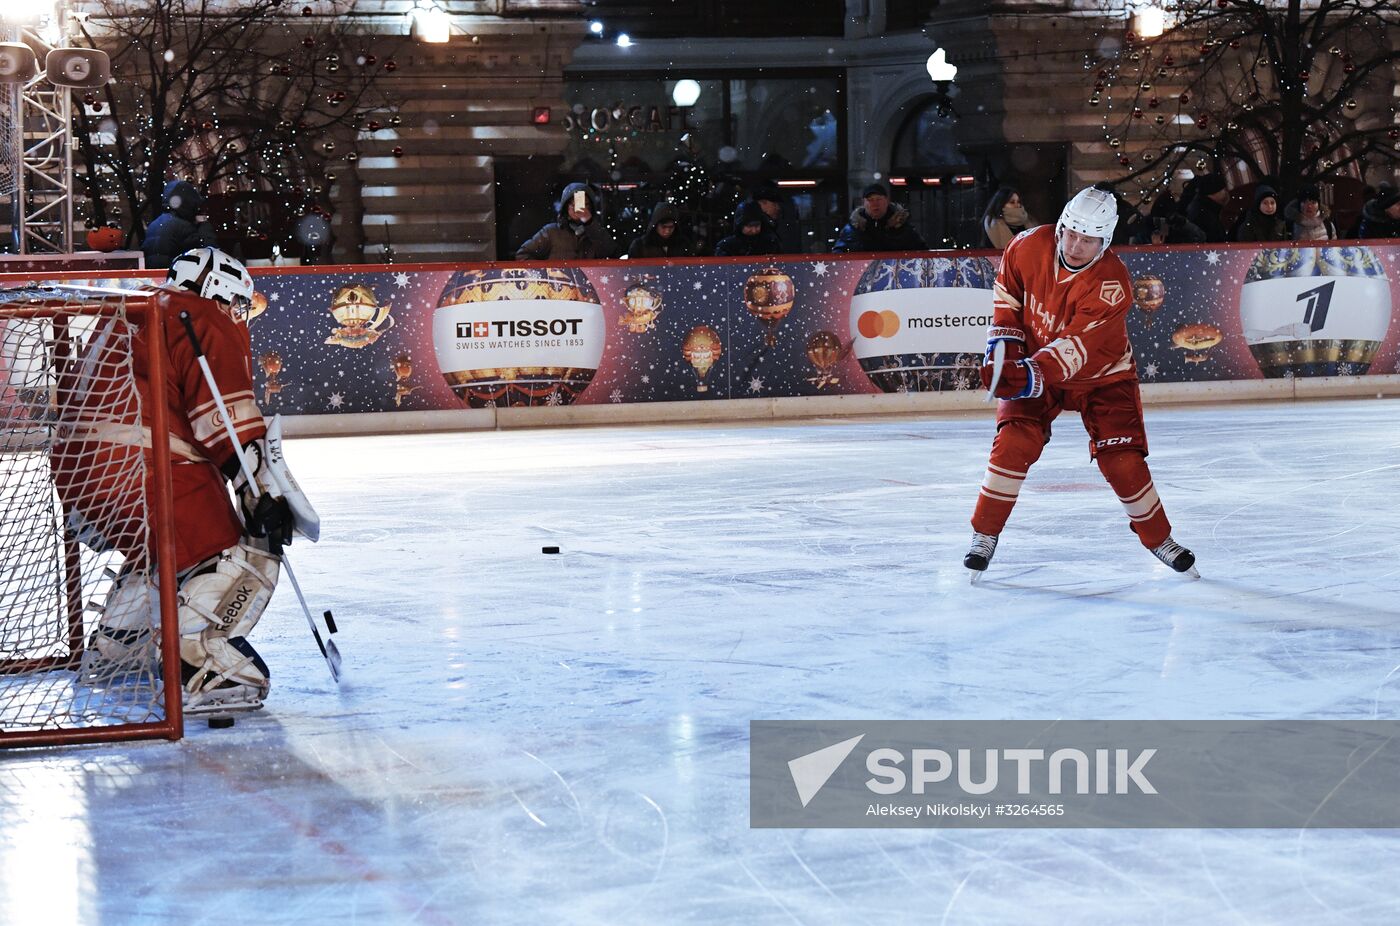 President Putin takes part in NHL ice hockey match on Red Square